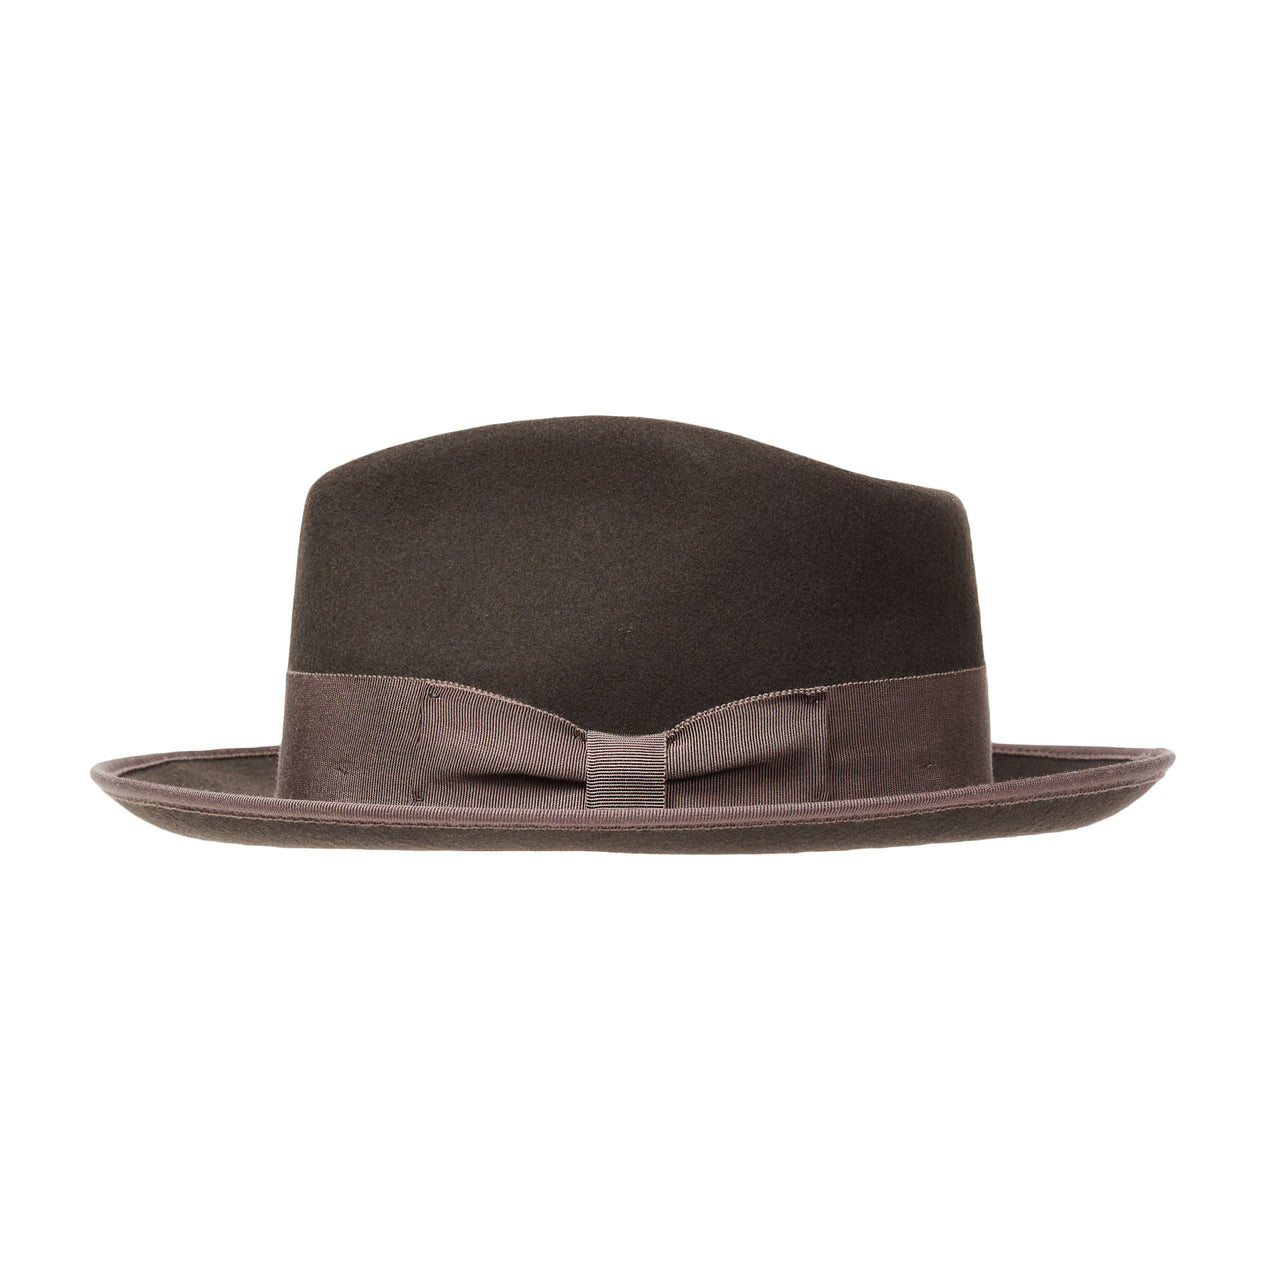 City Hatters Maxwell Trilby